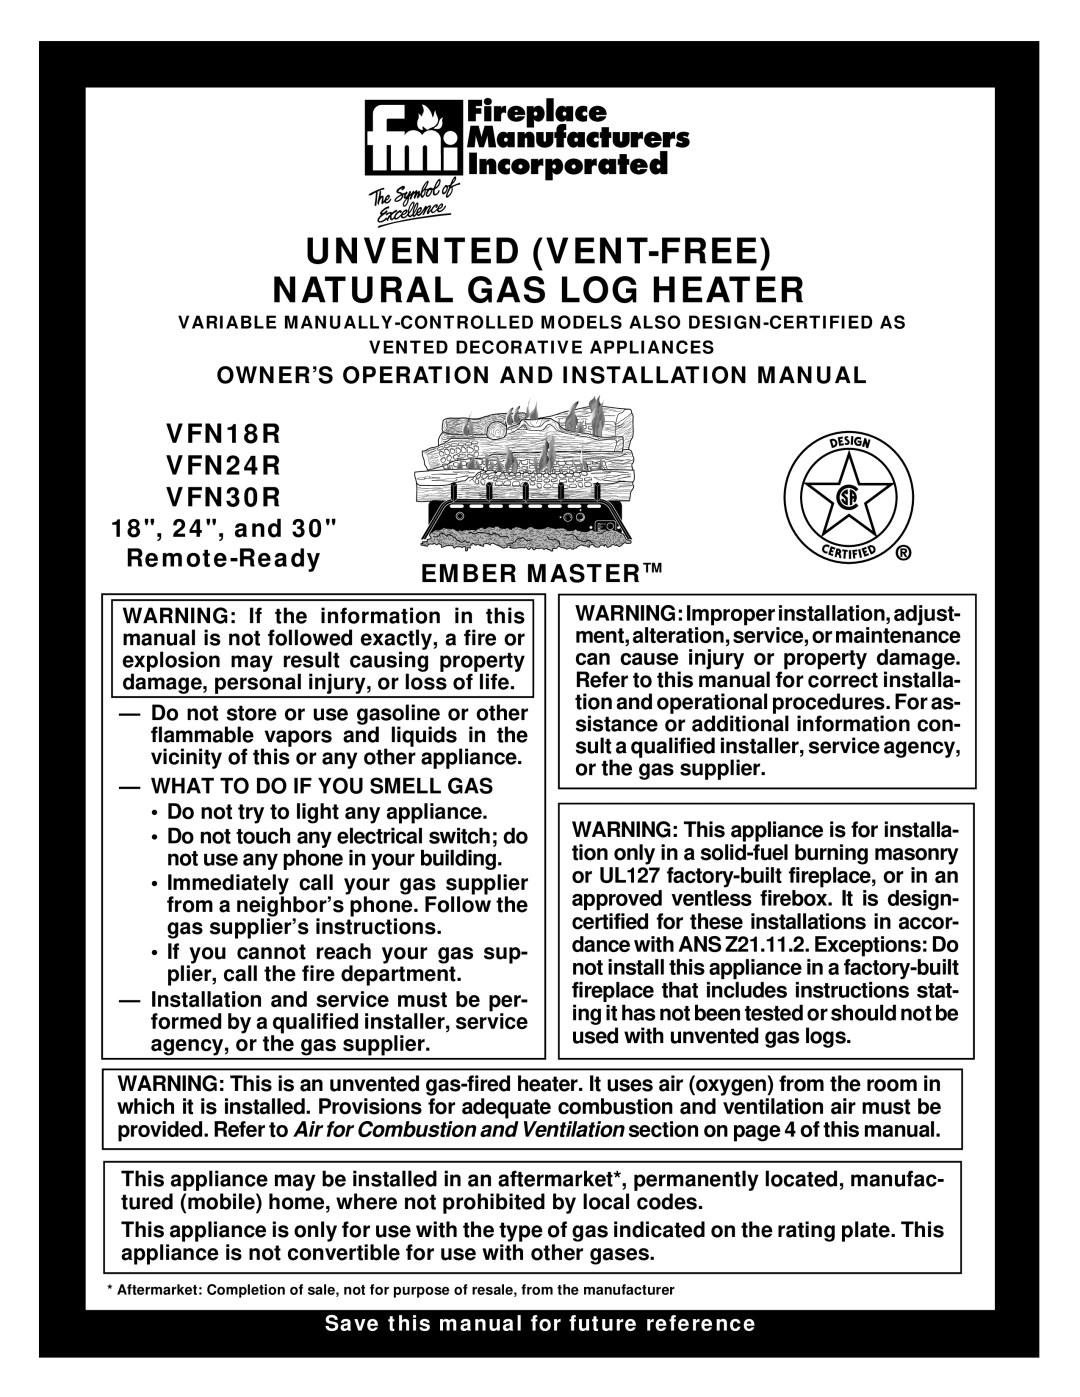 Desa VFN24R installation manual Unvented Vent-Free Natural Gas Log Heater, Owner’S Operation And Installation Manual 